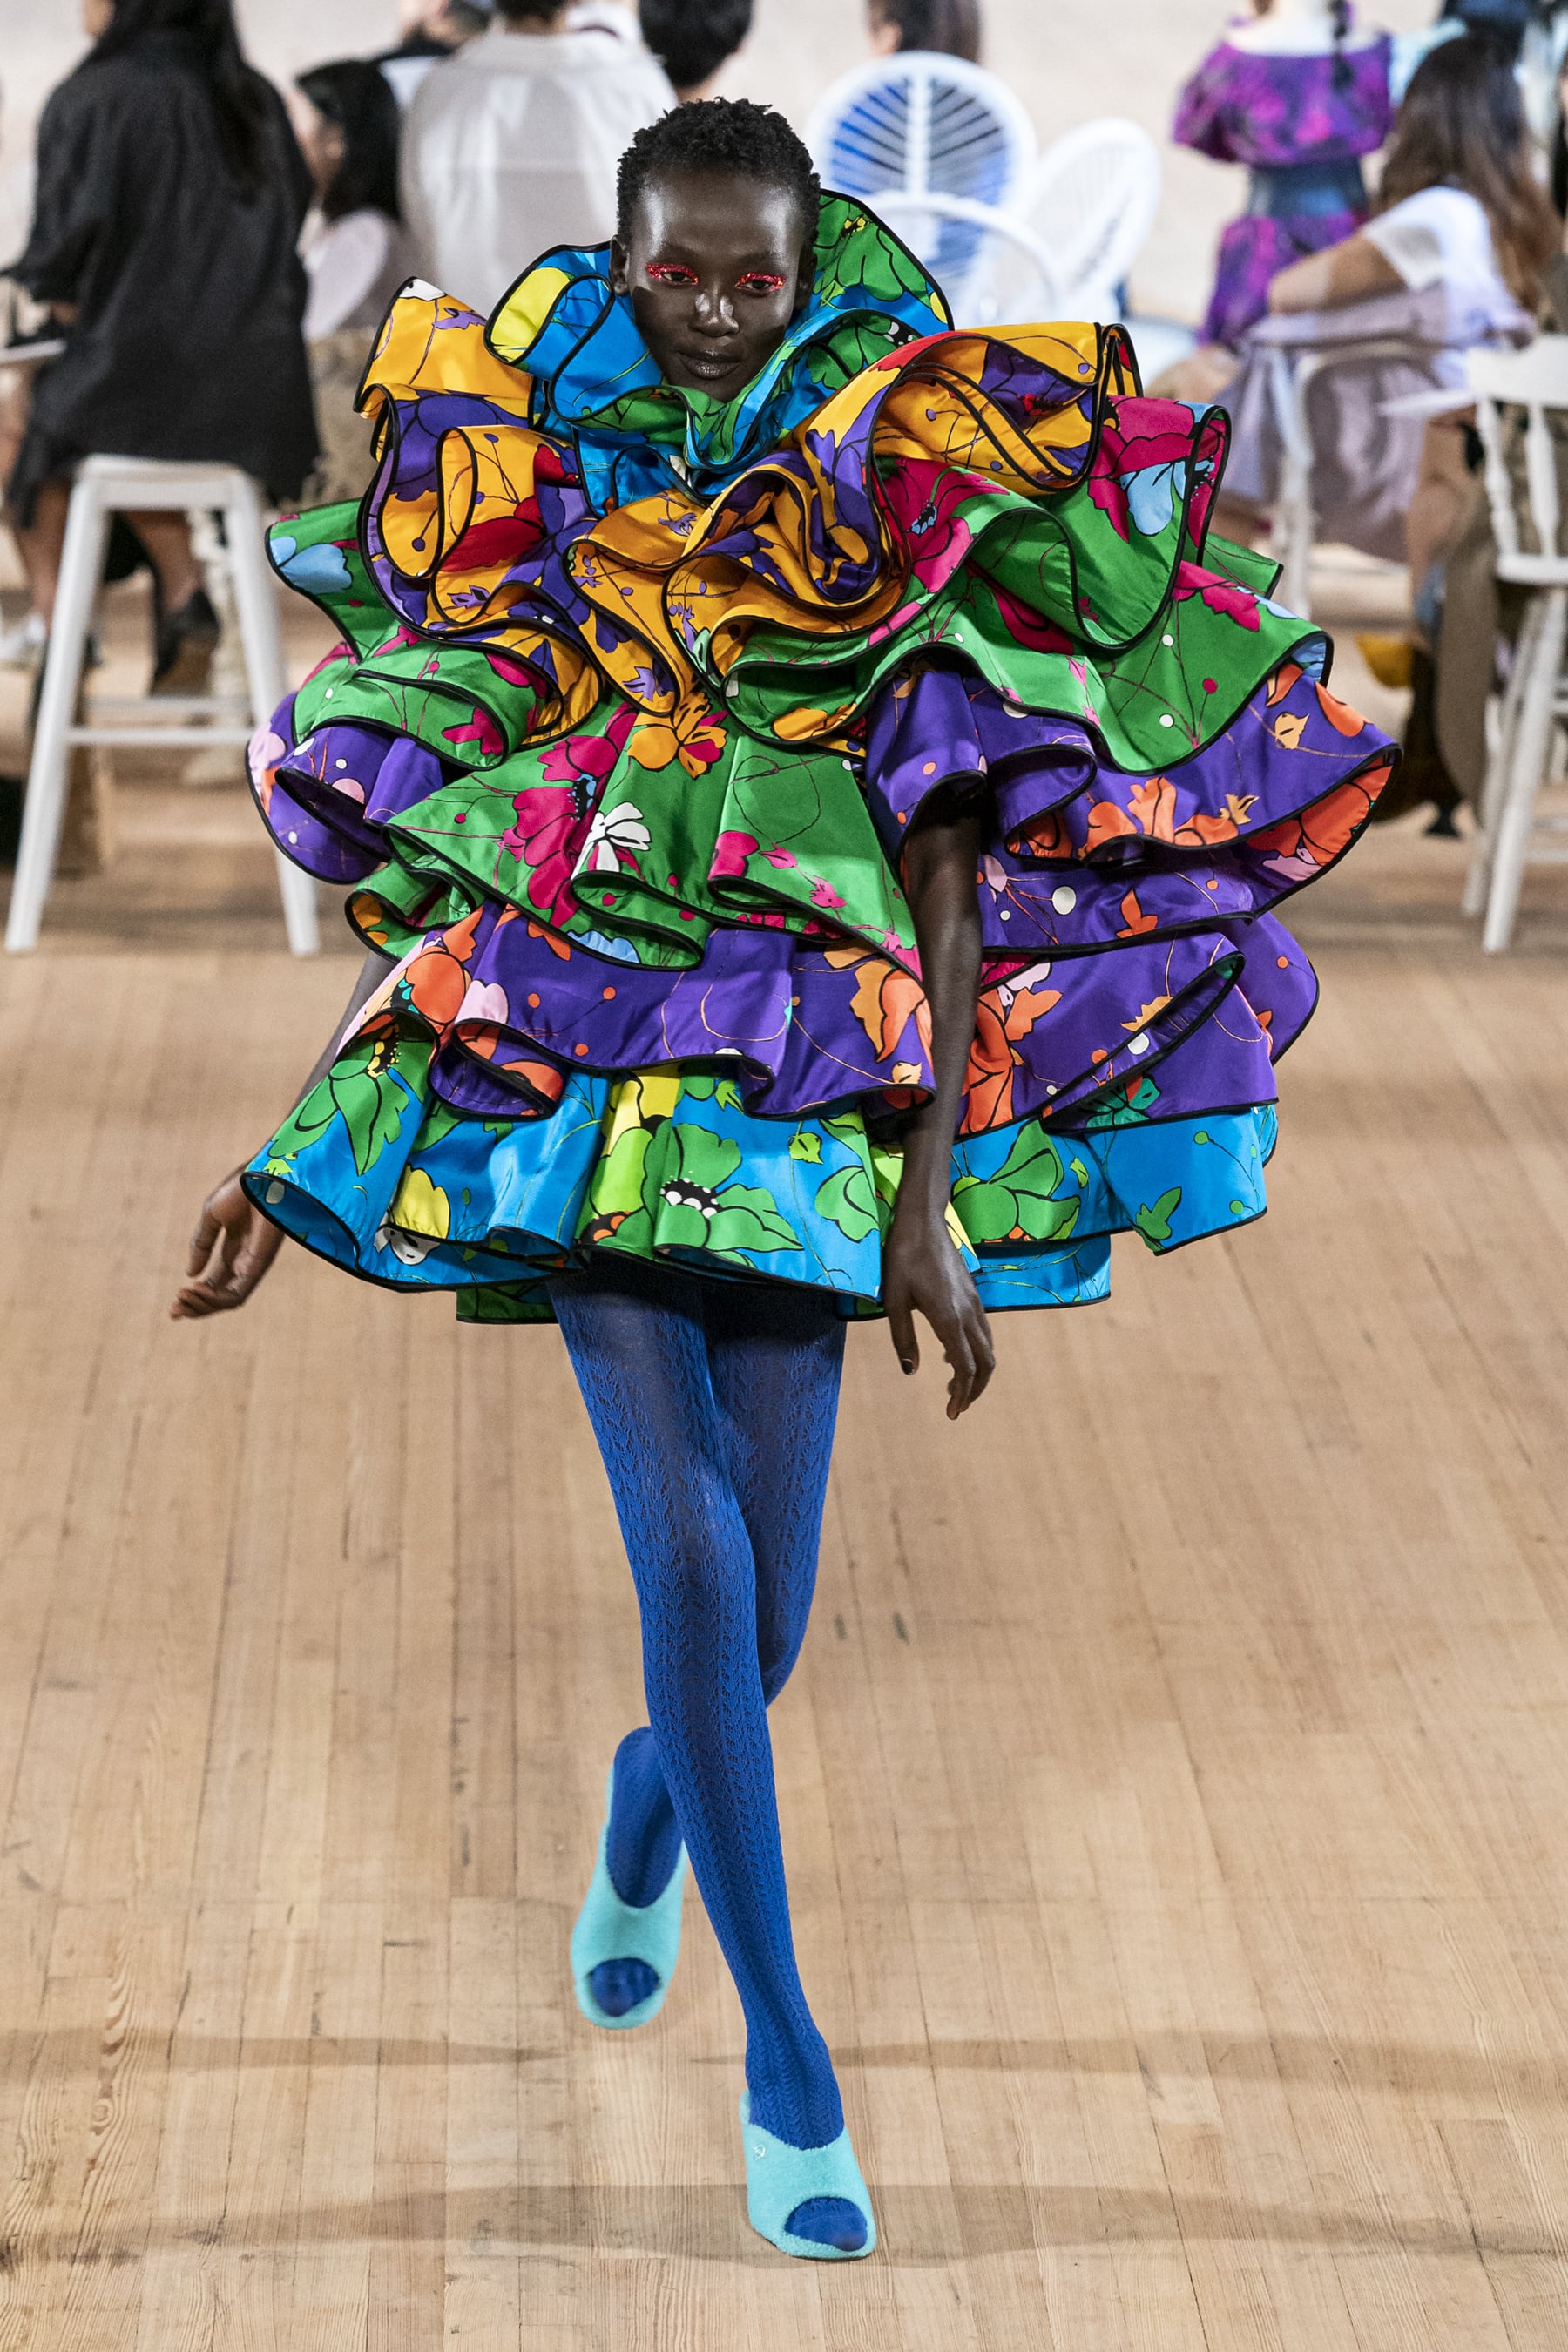 Fashion, Shopping & Style, Butterfly Sunglasses! Loofah Dresses! Cowboy  Hats! Marc Jacobs's Spring Runway Had It All